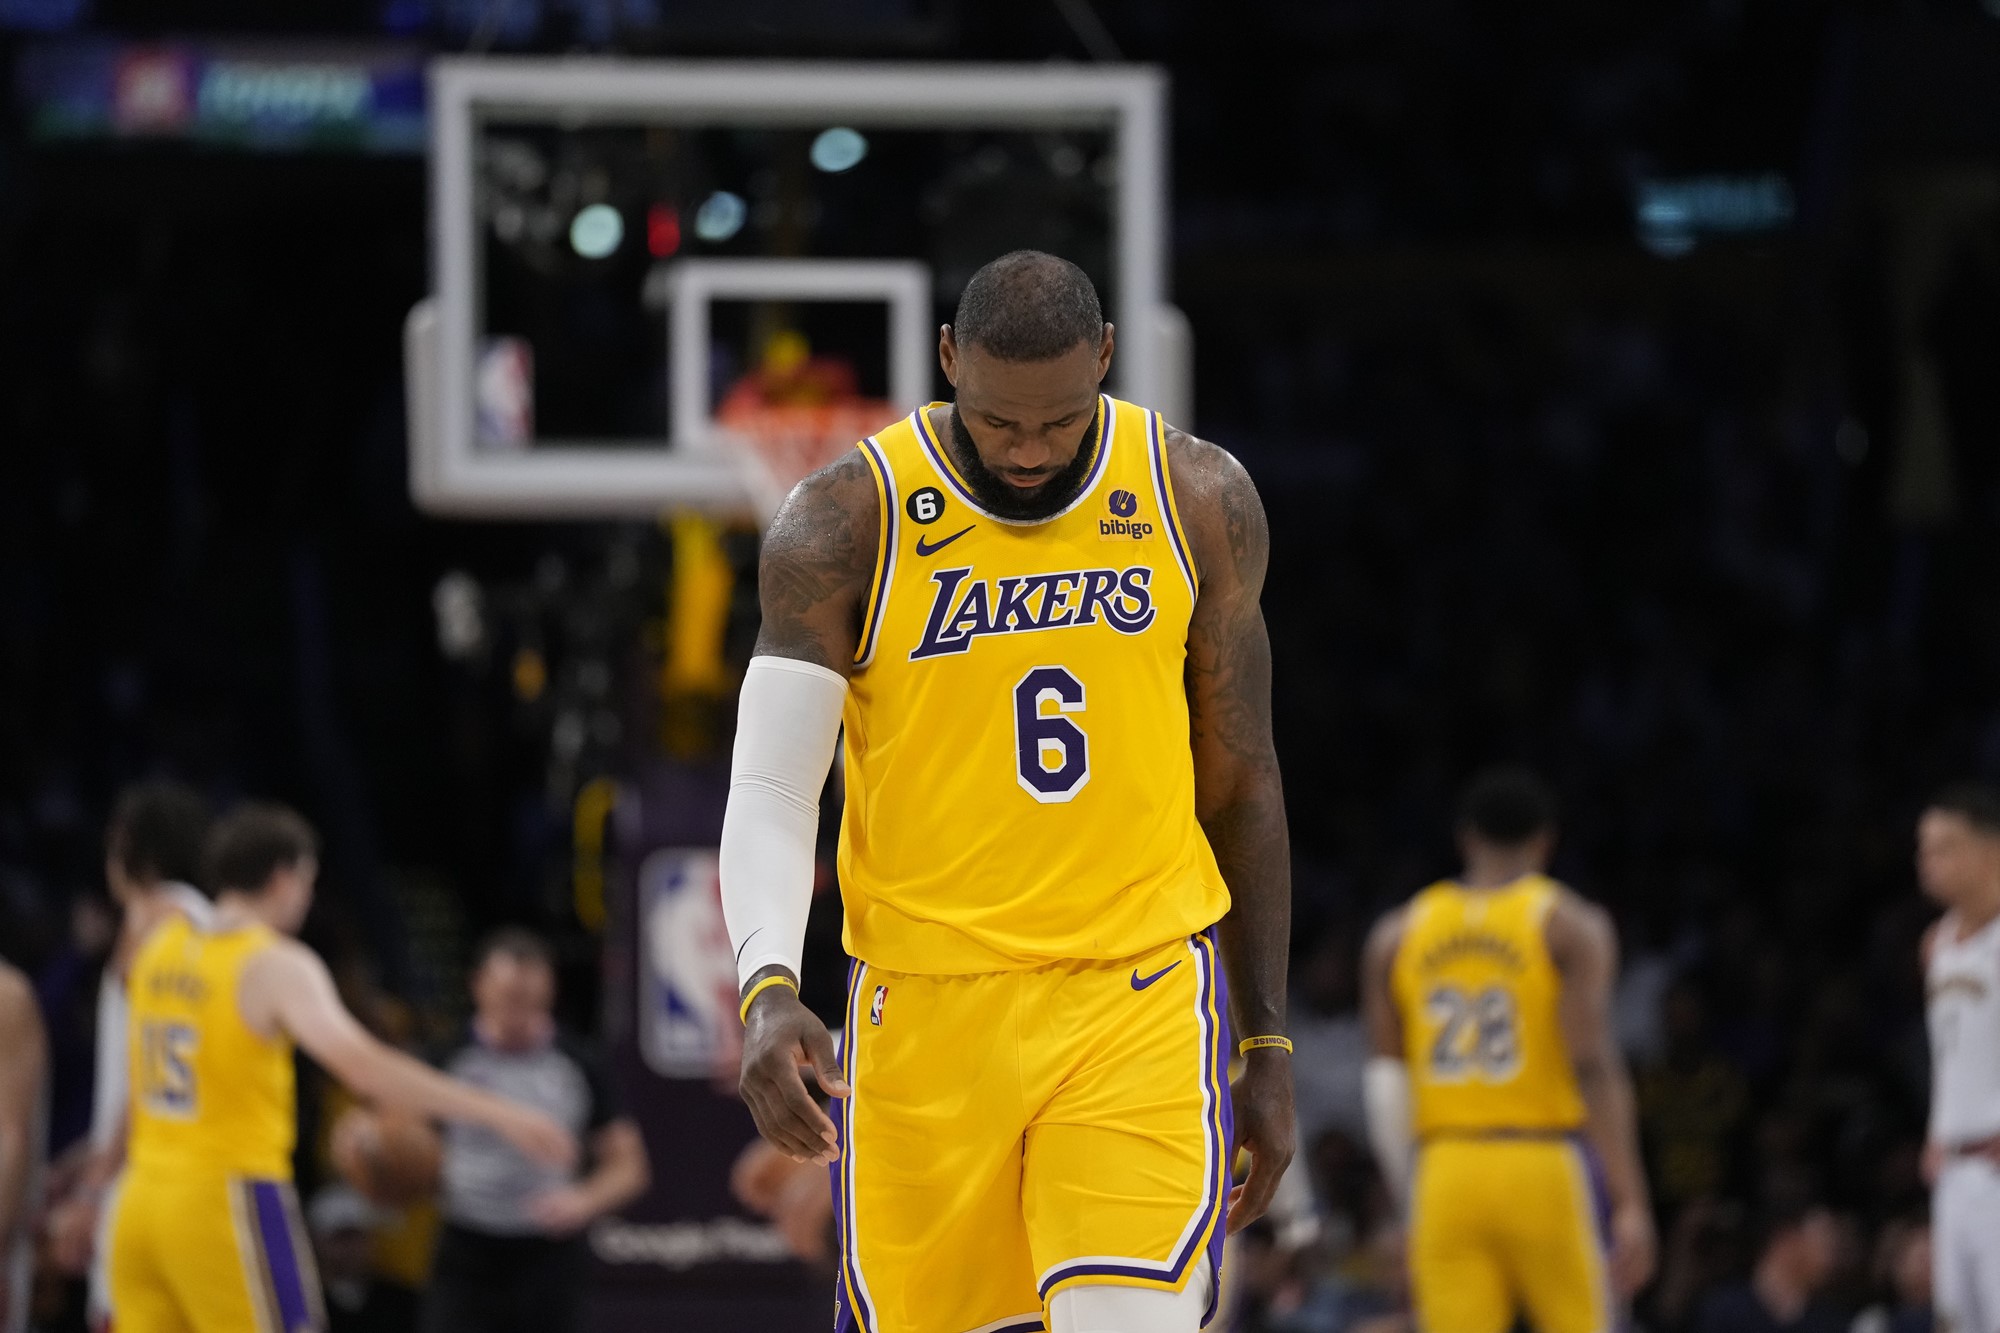 Lebron James in his Los Angeles Lakers jersey, walking on a basketball court with his head down